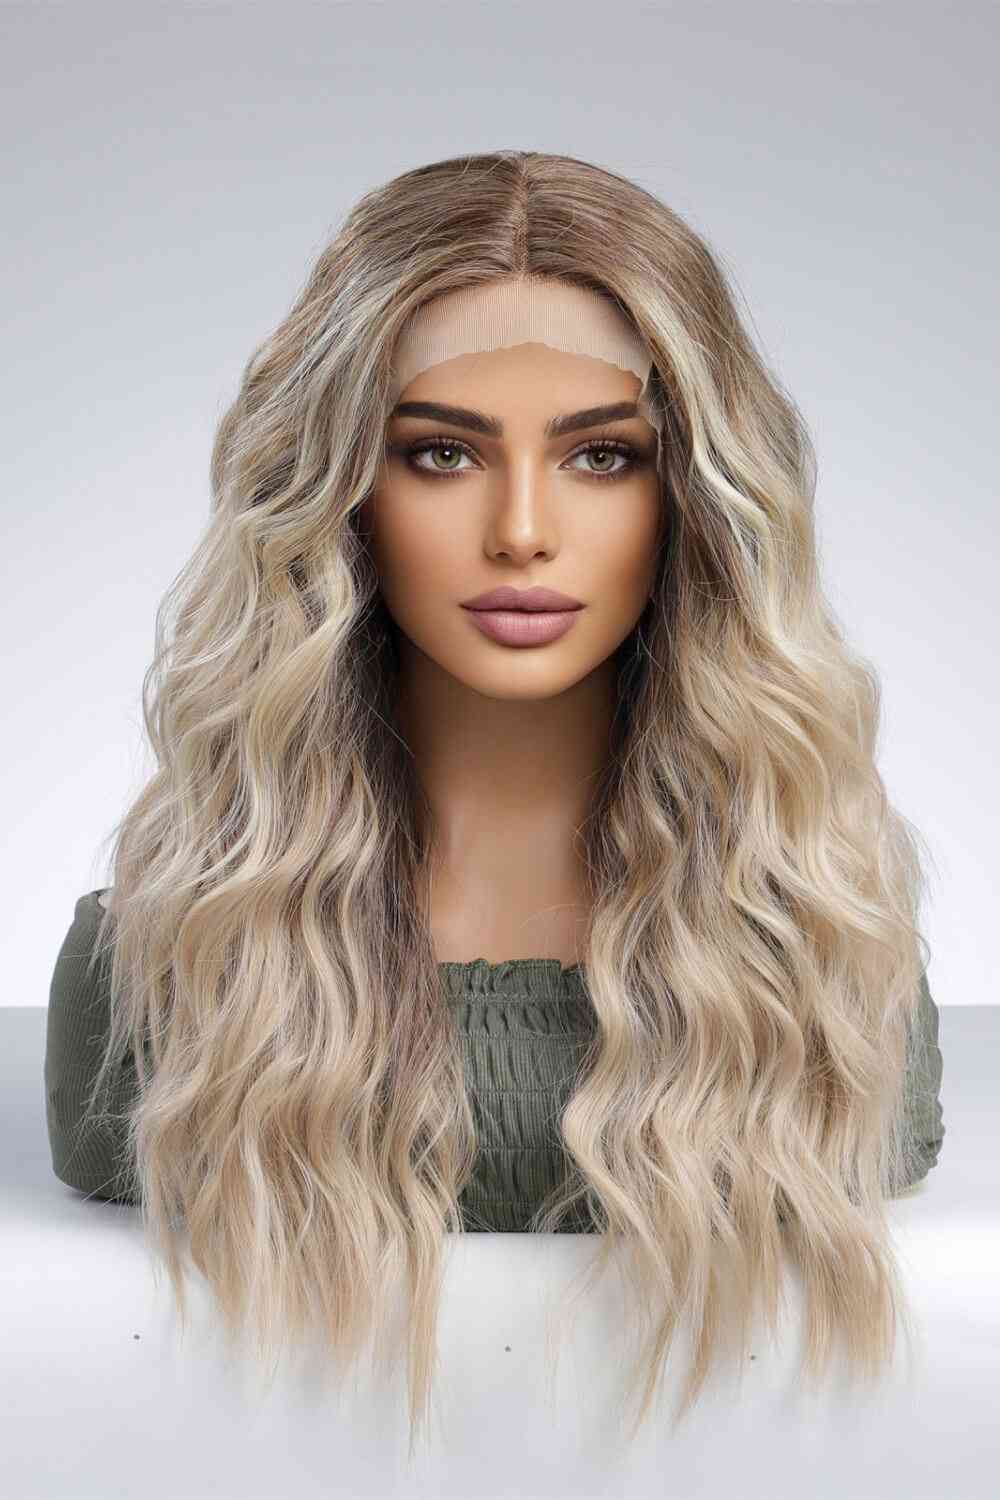 13*2" Lace Front Wigs Synthetic Long Wave 24'' 150% Density Light Brown/Blonde Ombre One Size 